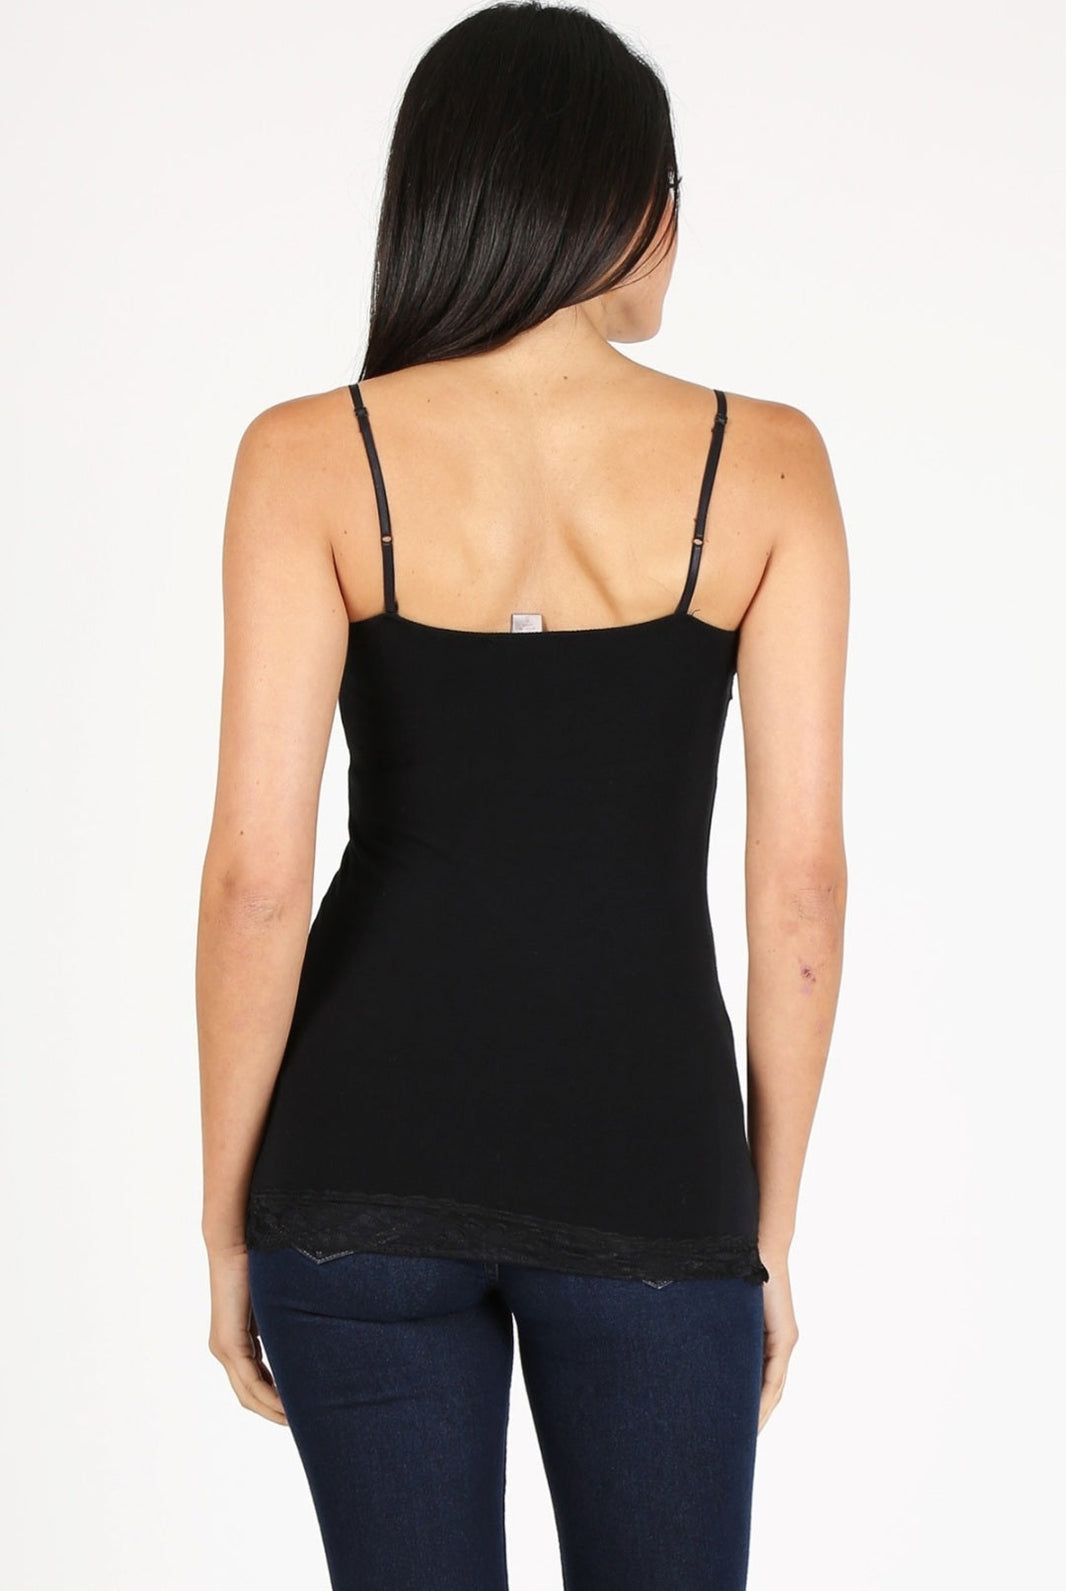 Black solid camisole with lace trim